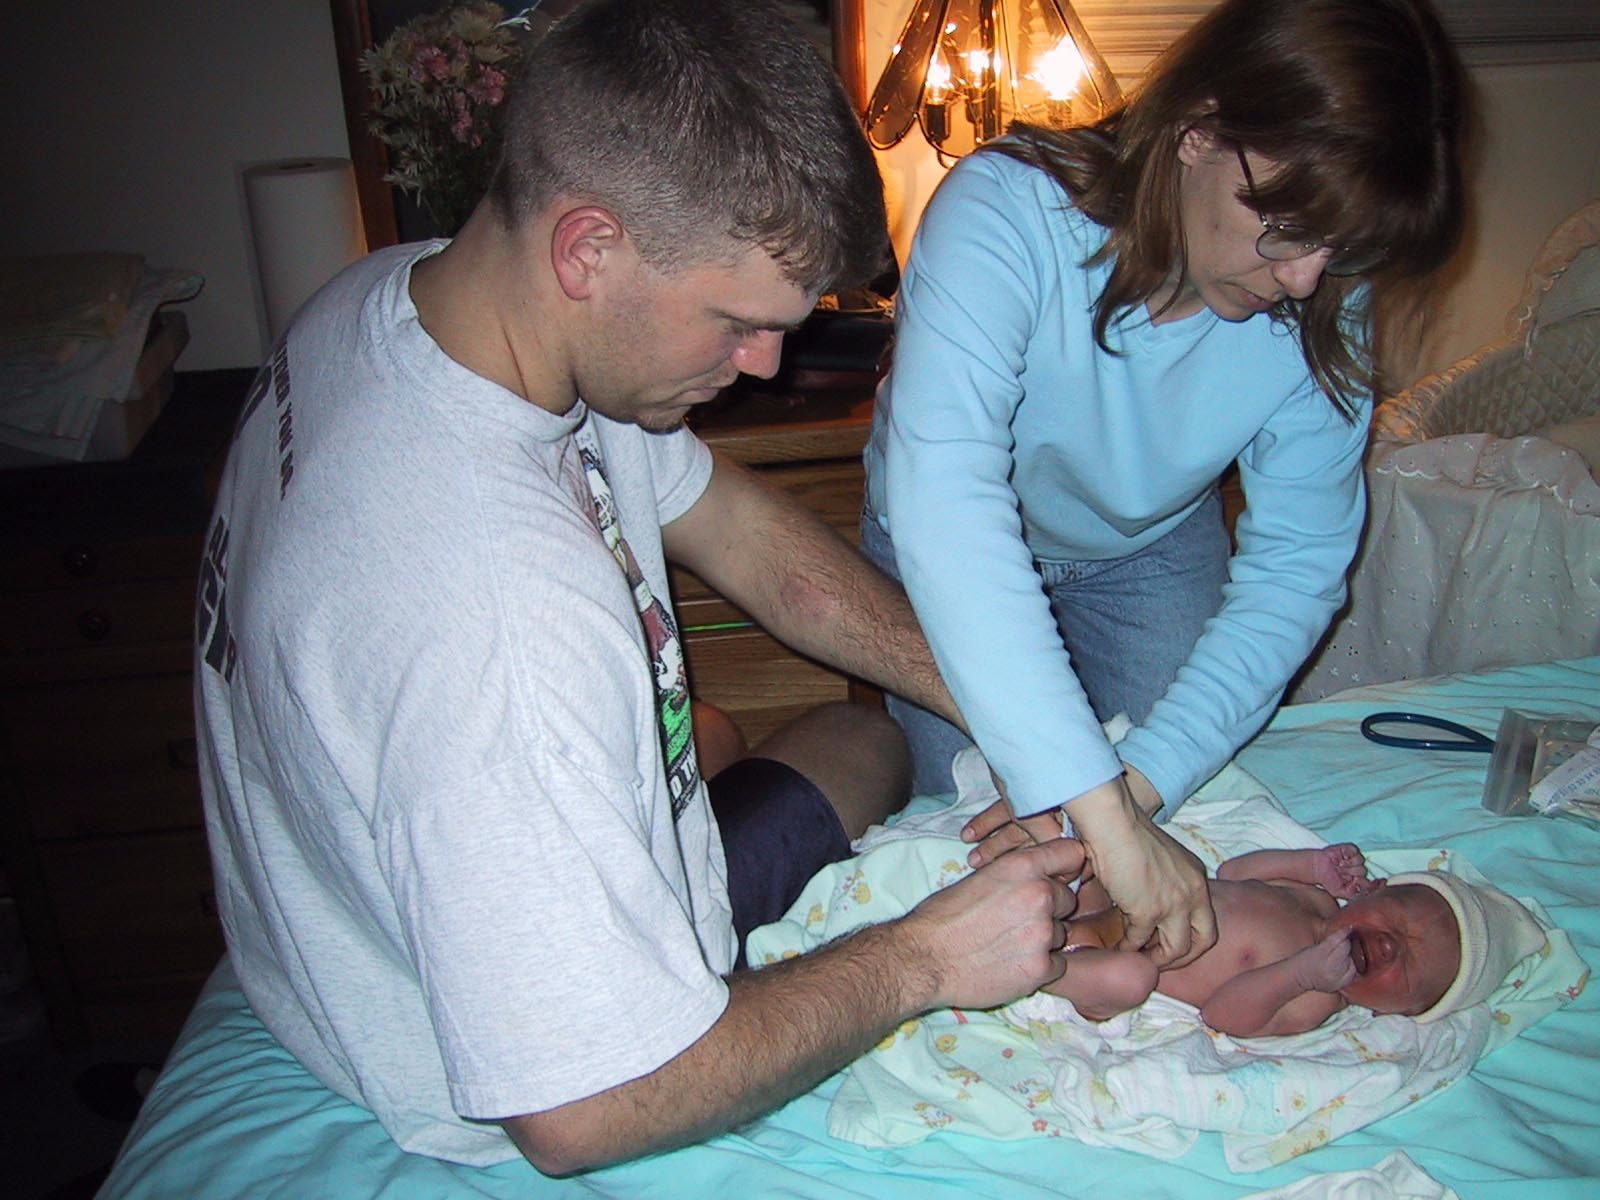 Laurie and a new Dad diapering and dressing the baby after the newborn exam.